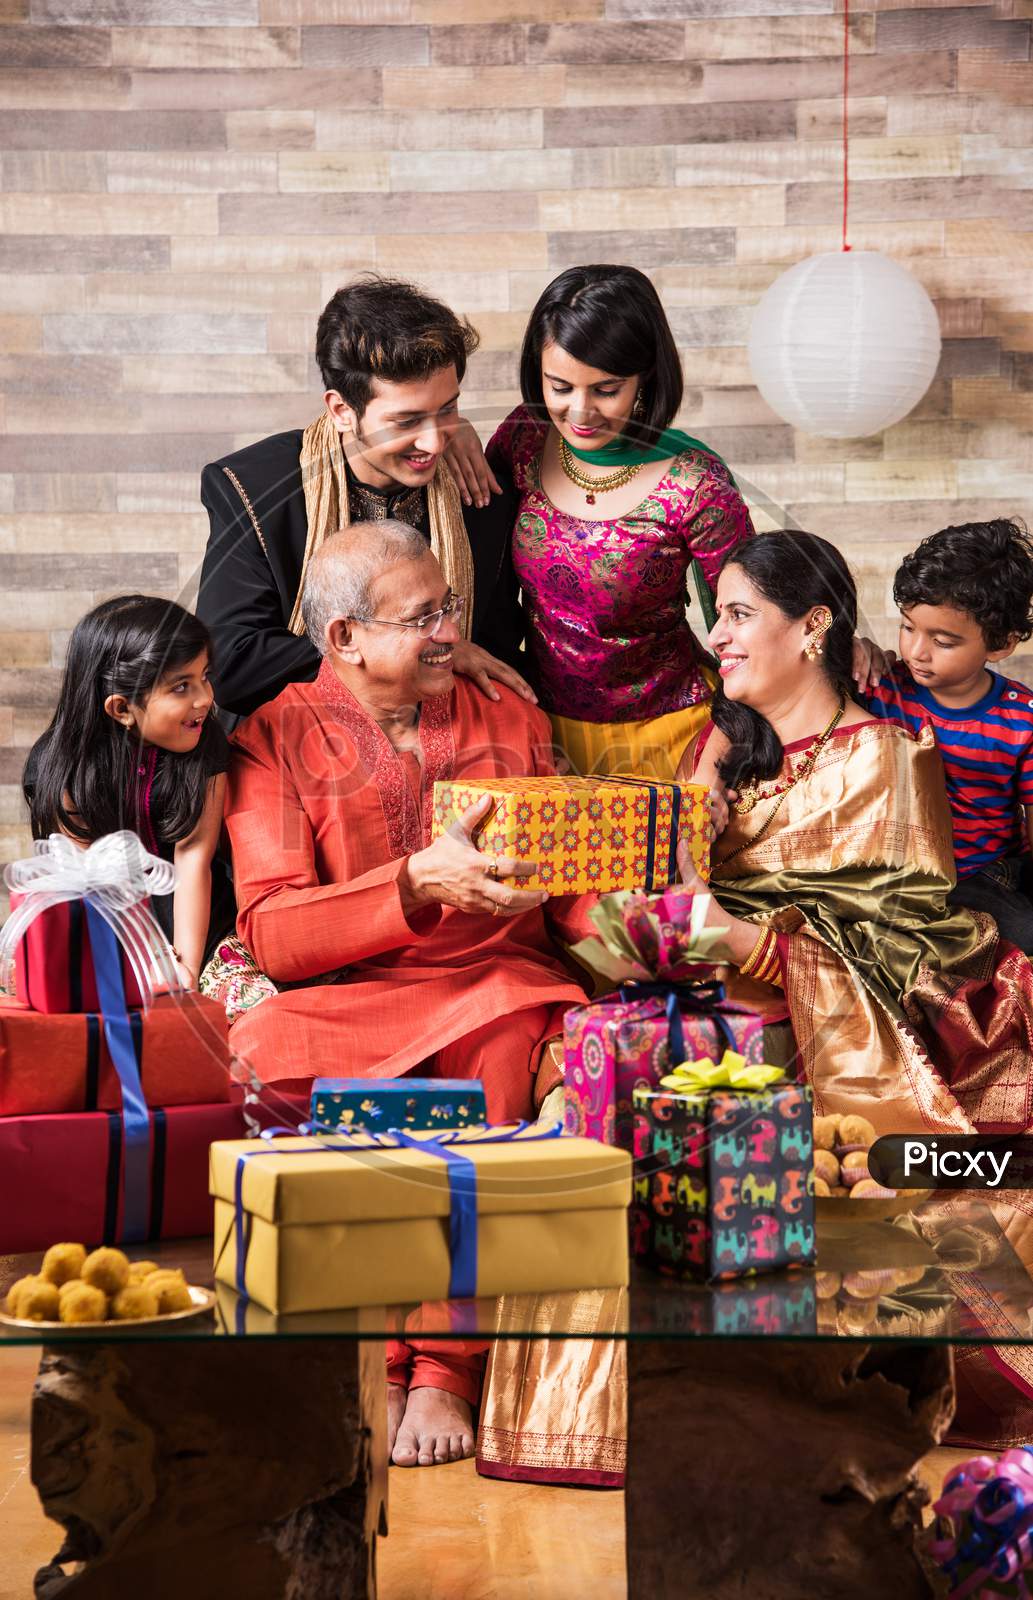 Indian family celebrating diwali with gifts and sweets